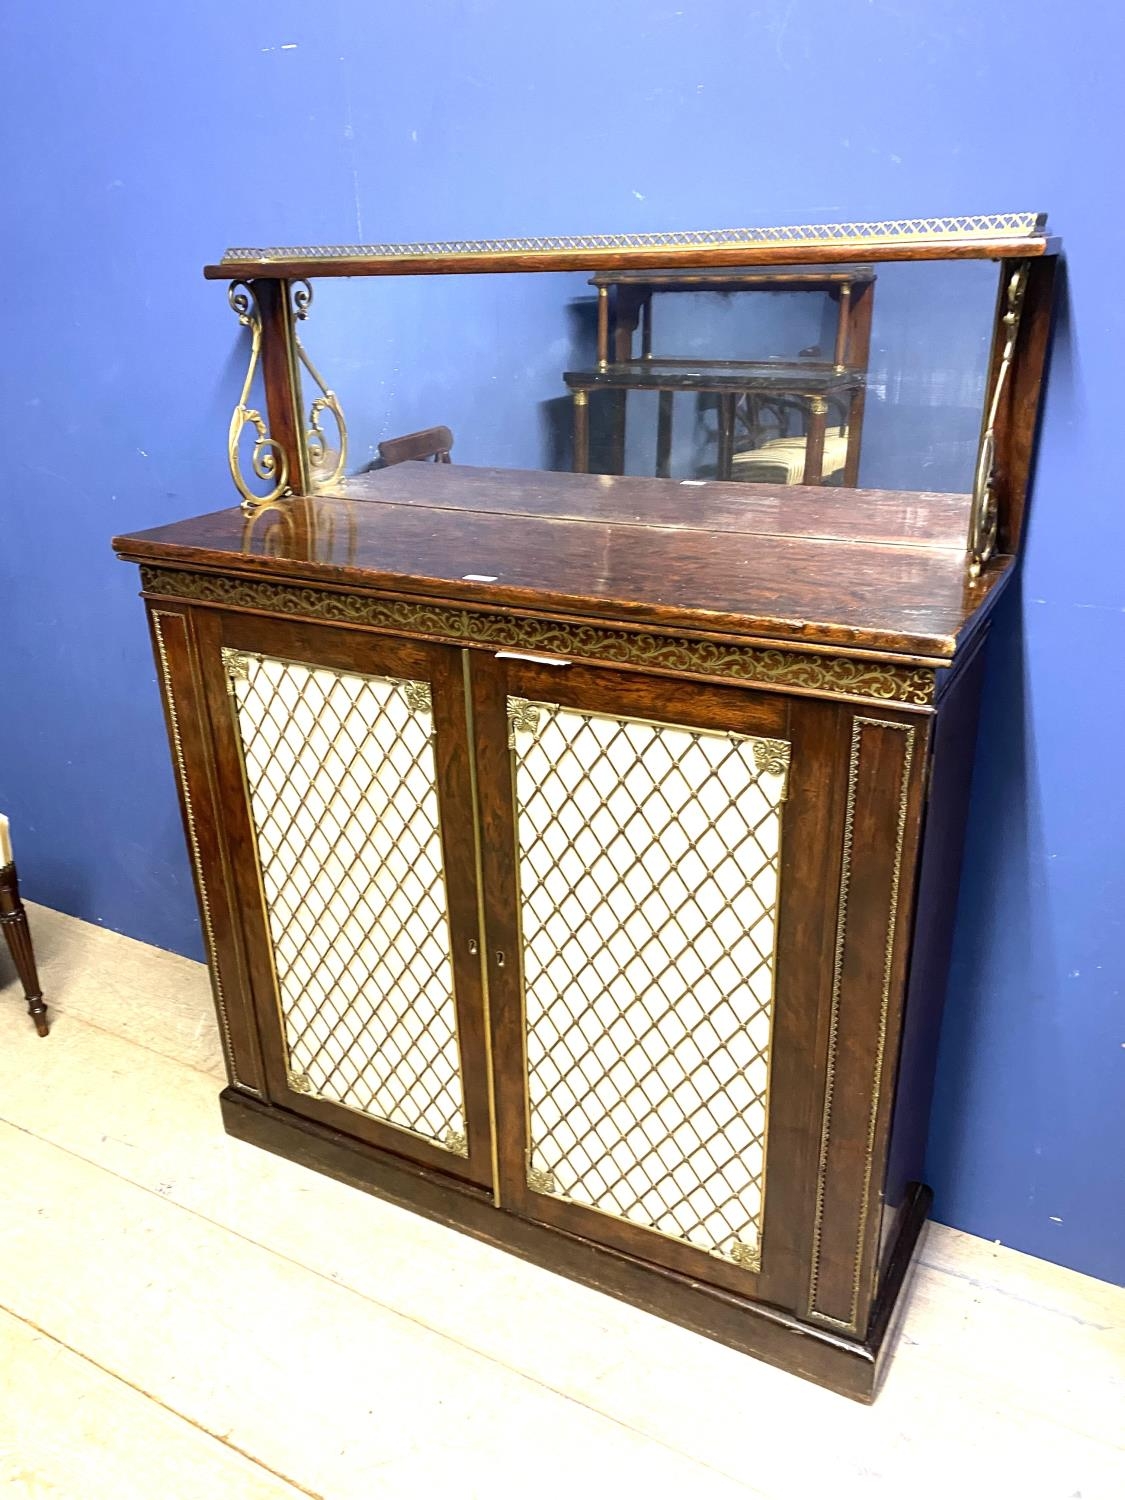 Good Regency brass inlaid rosewood chiffonier with mirrored back below brass galleried shelf above a